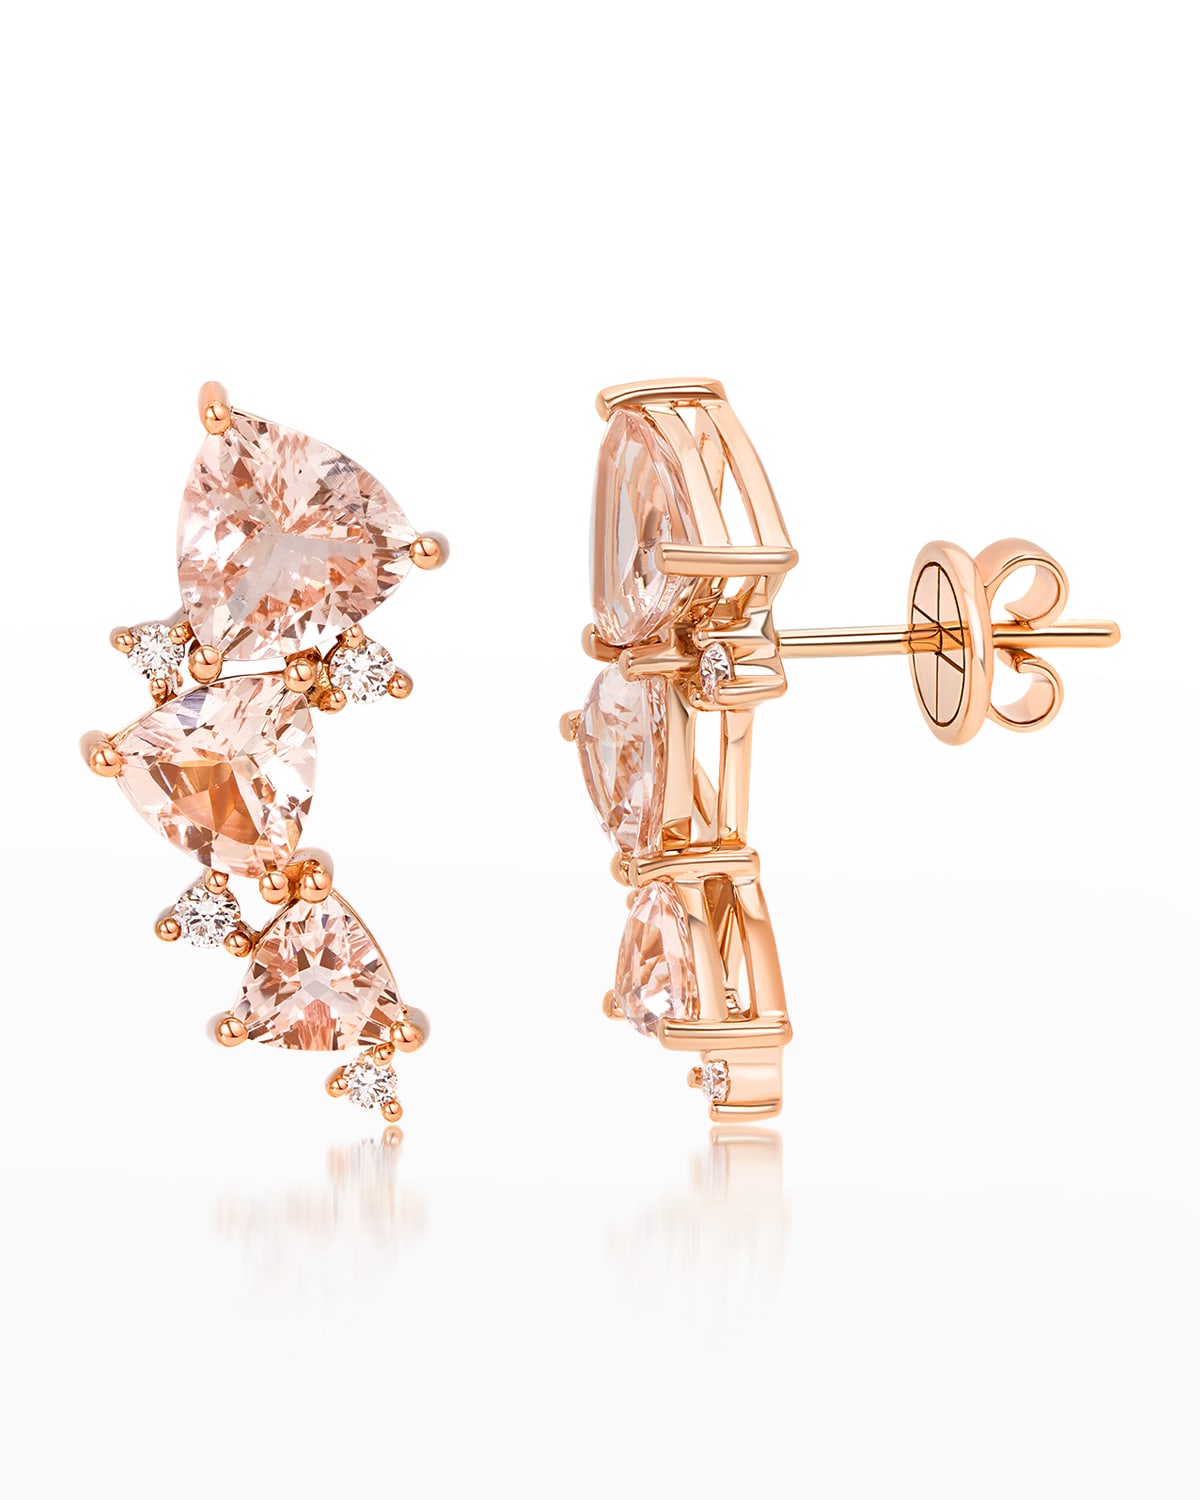 Mirage Pink Gold Earrings with Diamonds and Rose Morganite